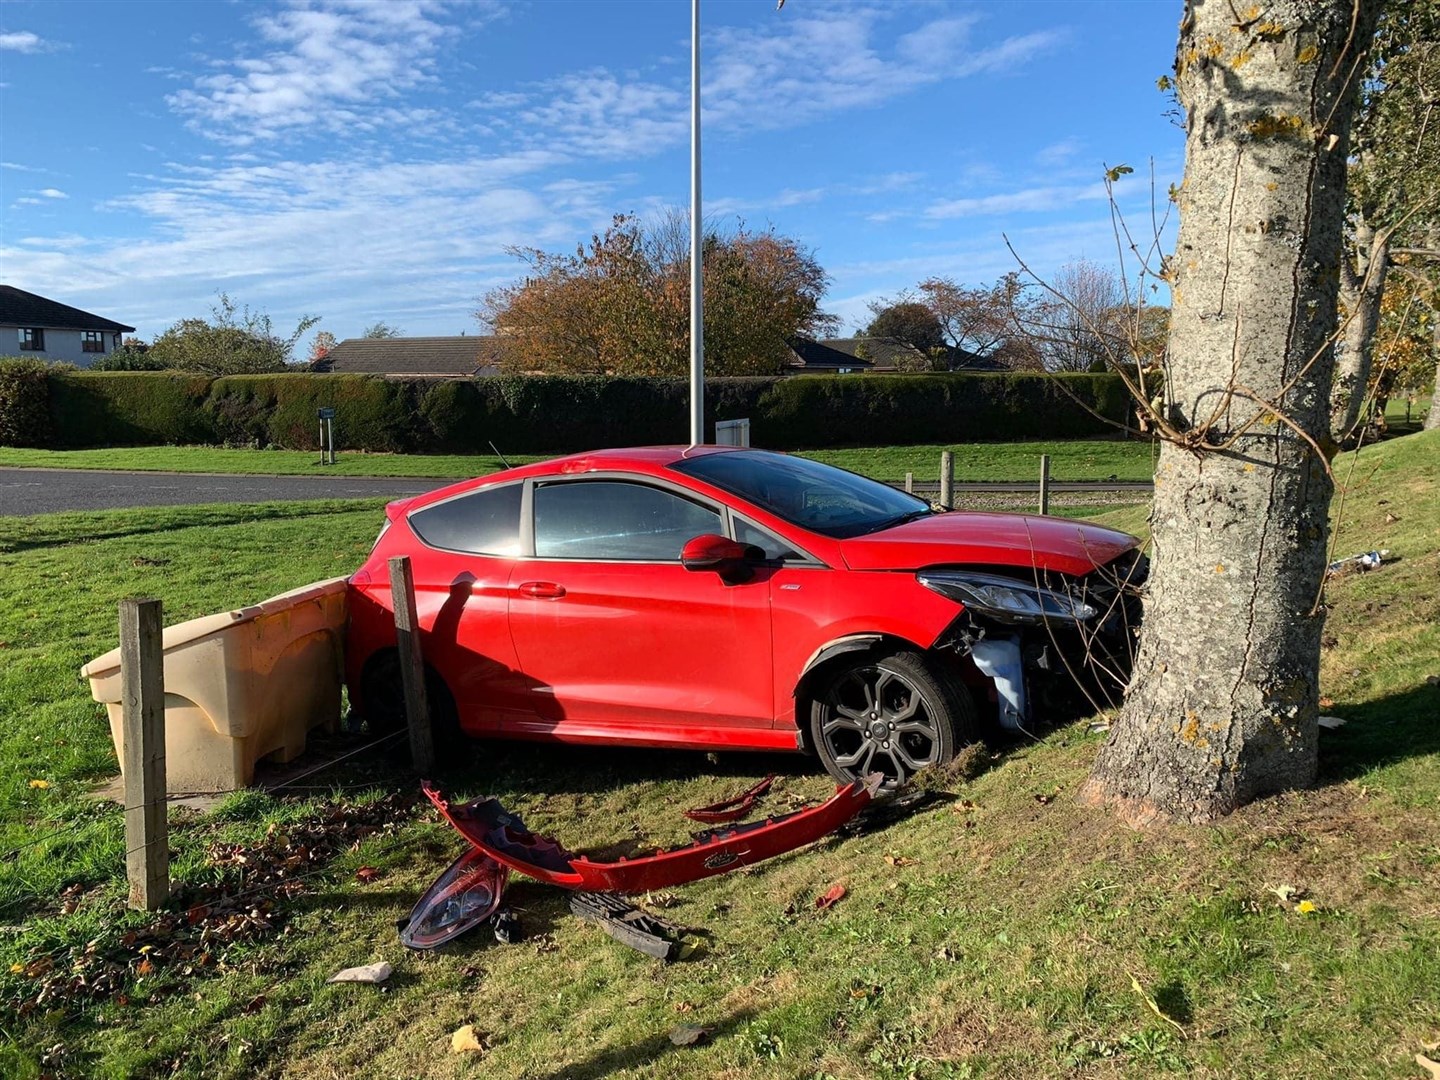 The red Ford crashed at the bottom of Forbeshill.